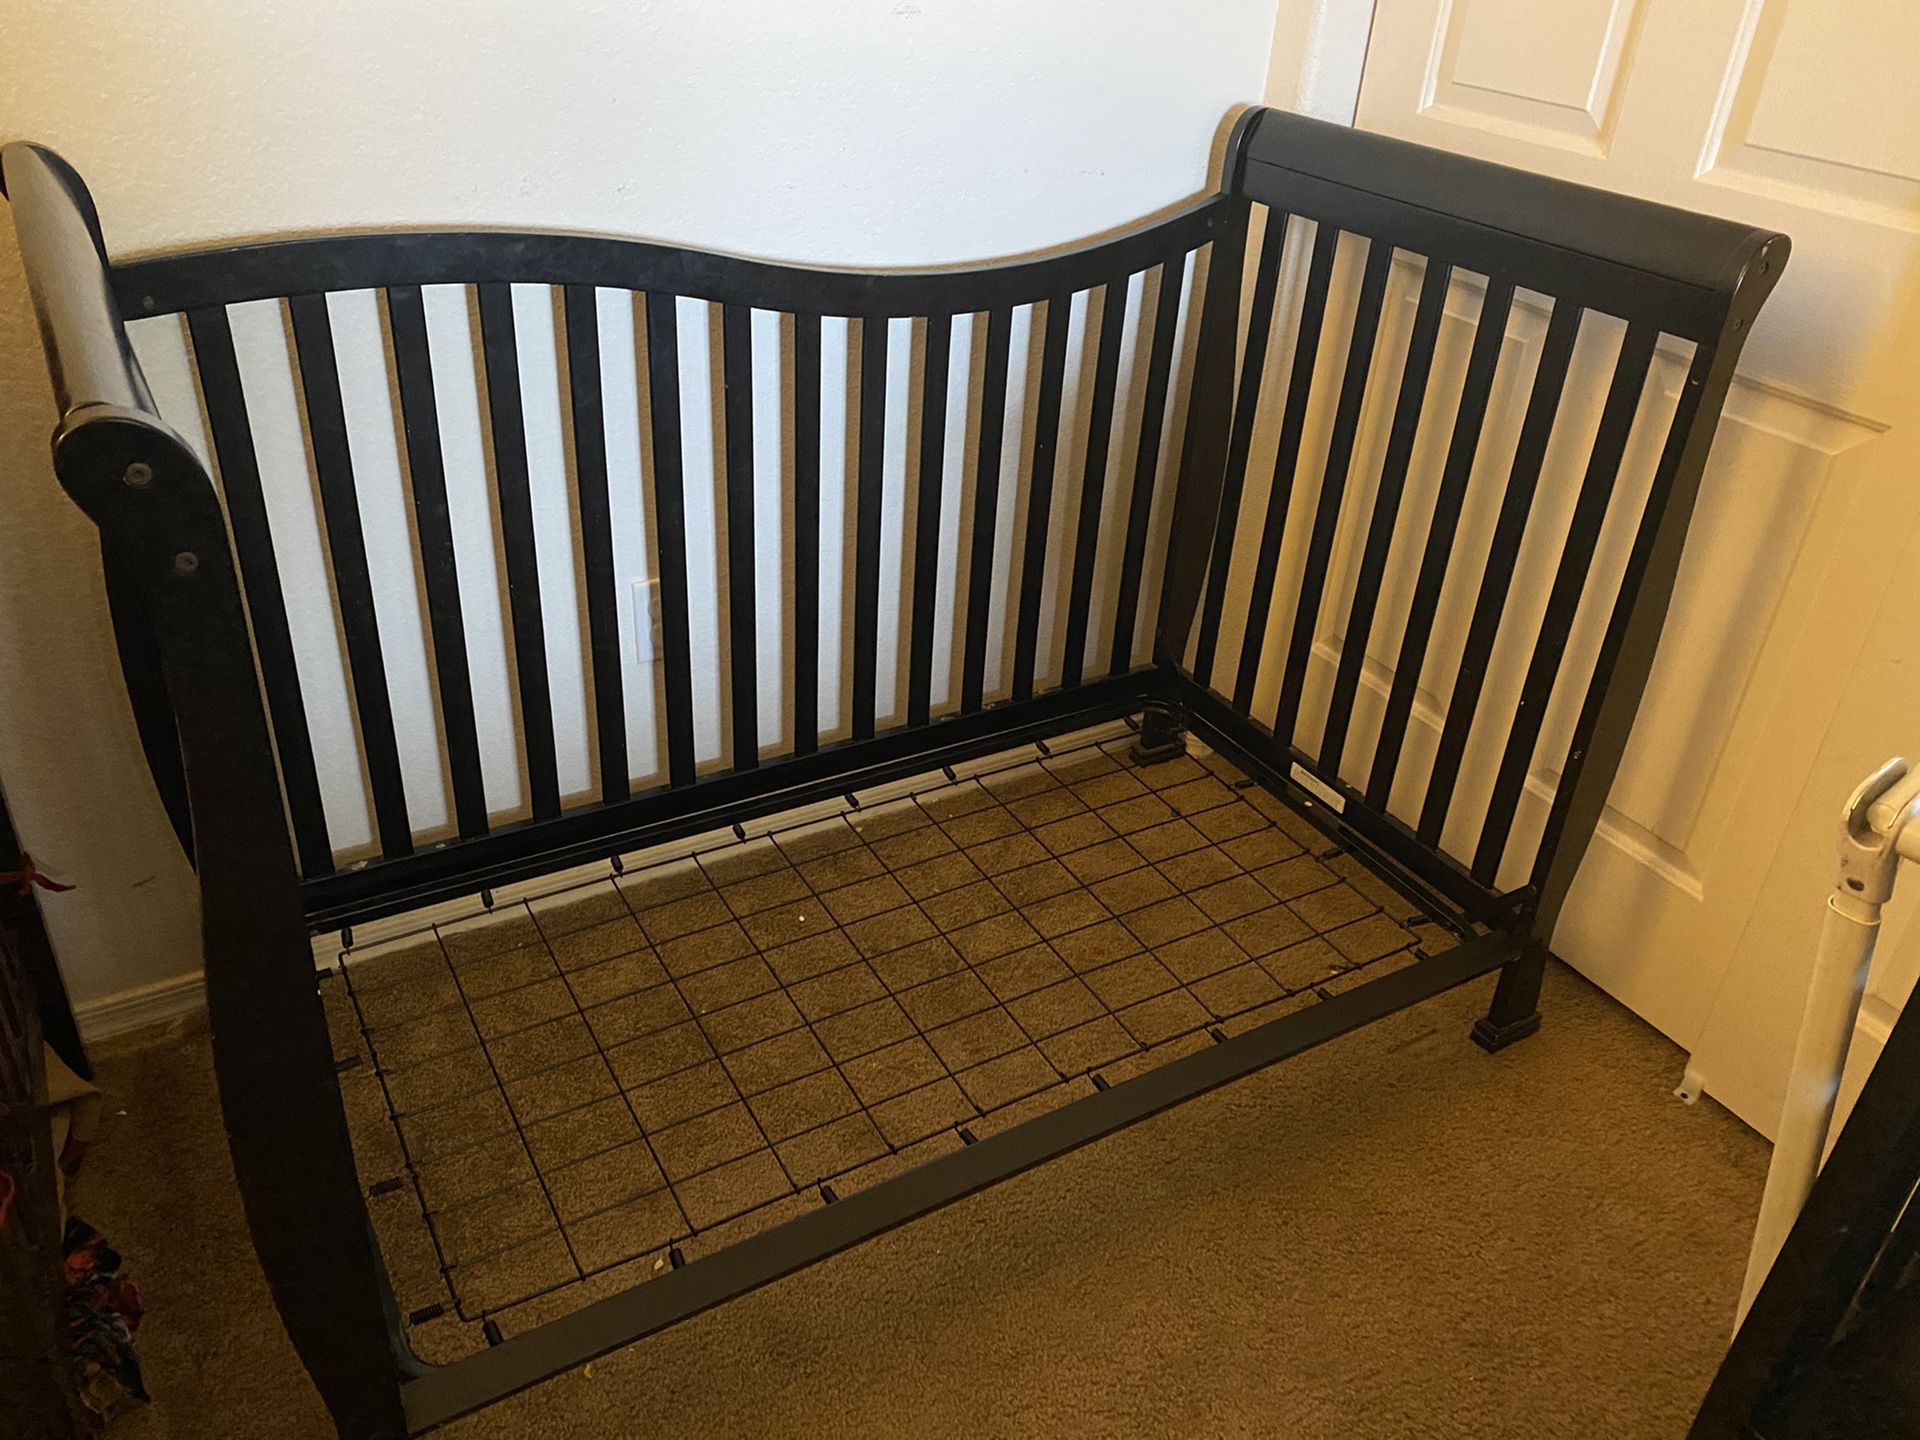 Crib and changing table.